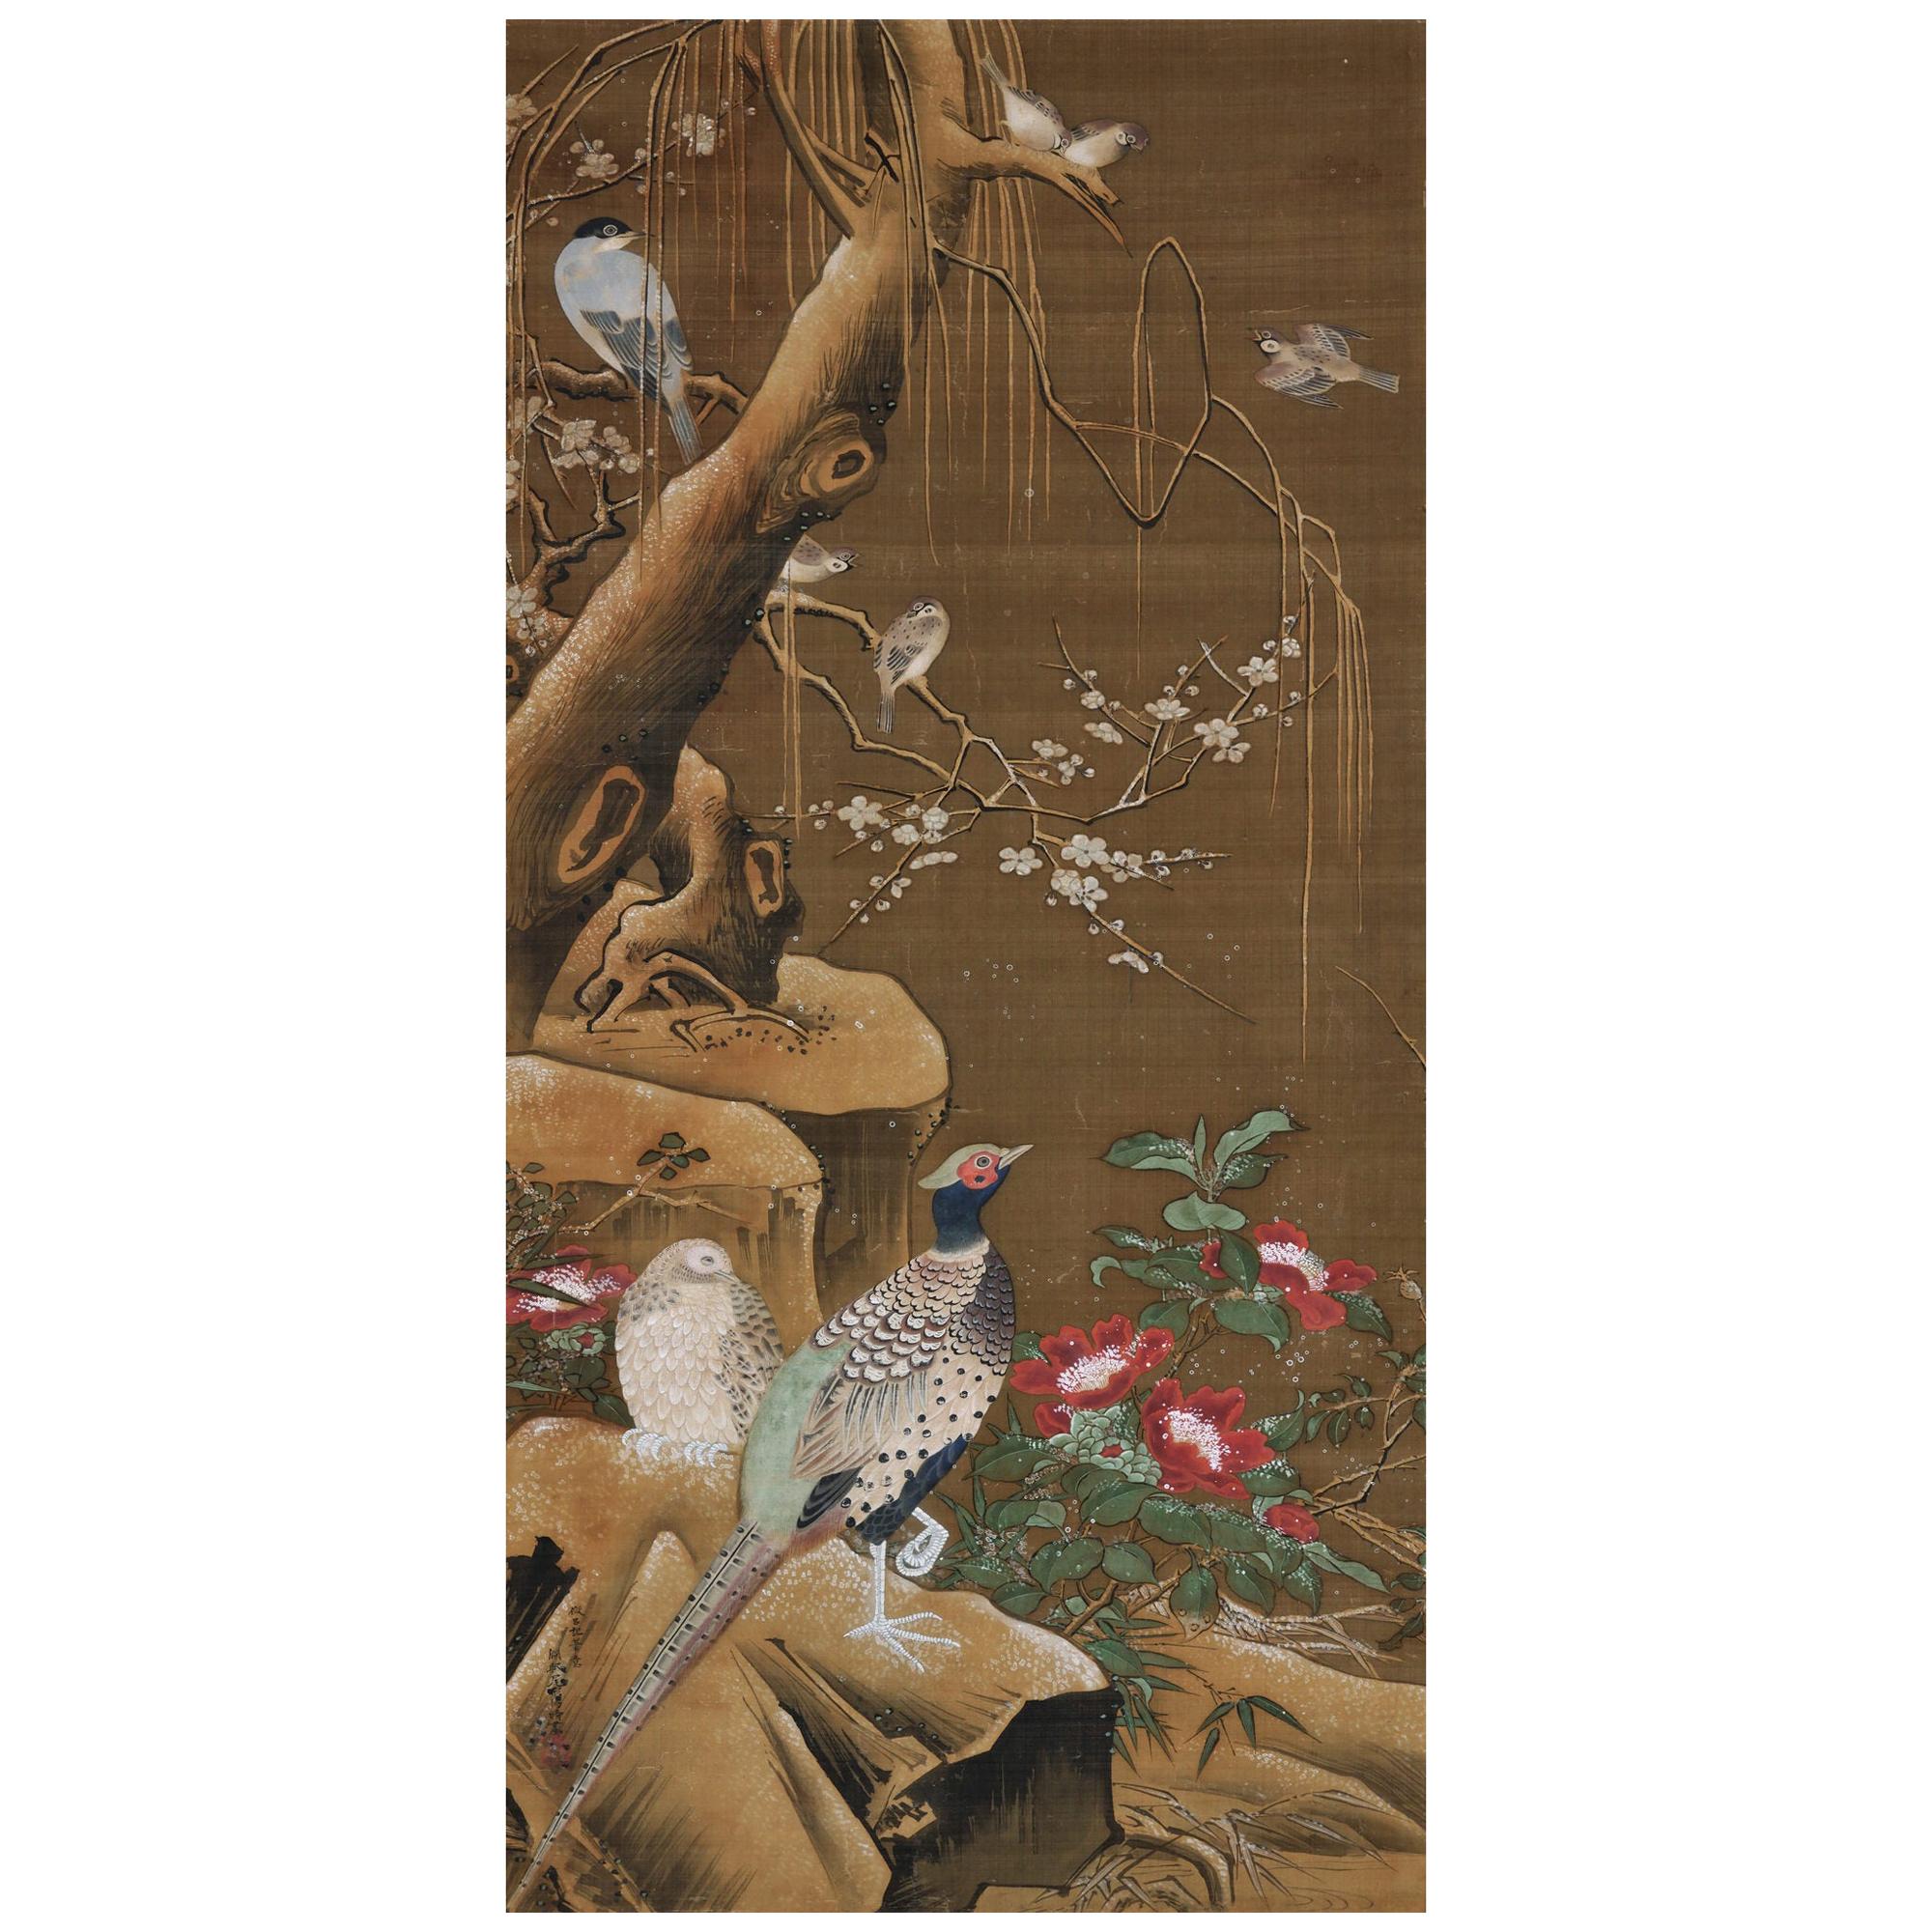 Japanese Painting. Bird and Flower. 19th century copy of Lu Ji by Ogata Tomin.